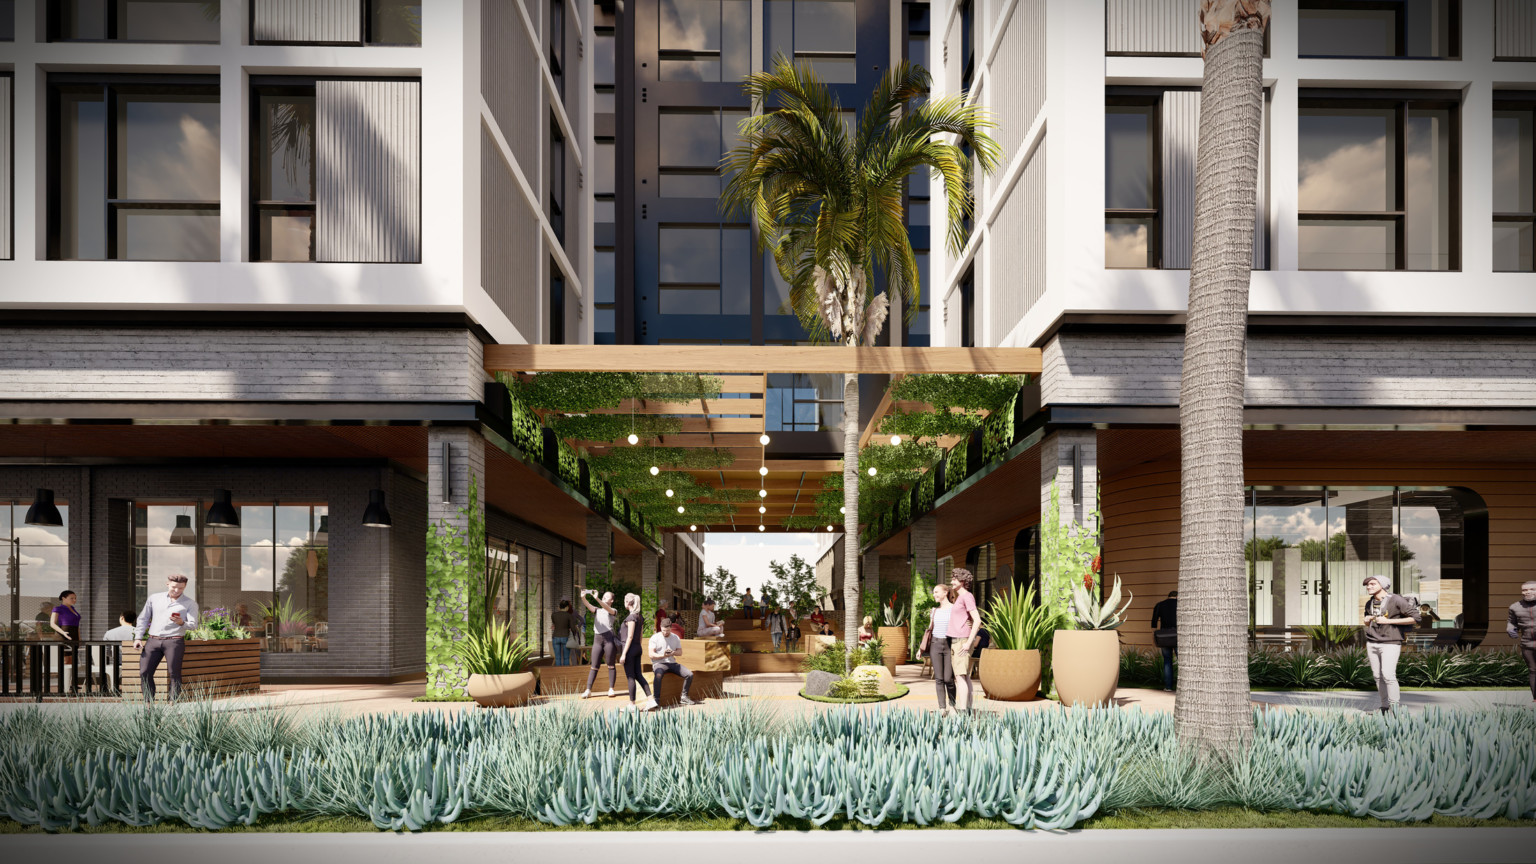 shaded pedestrian seating and walkways at the foot of a building development with palm trees and living ground cover